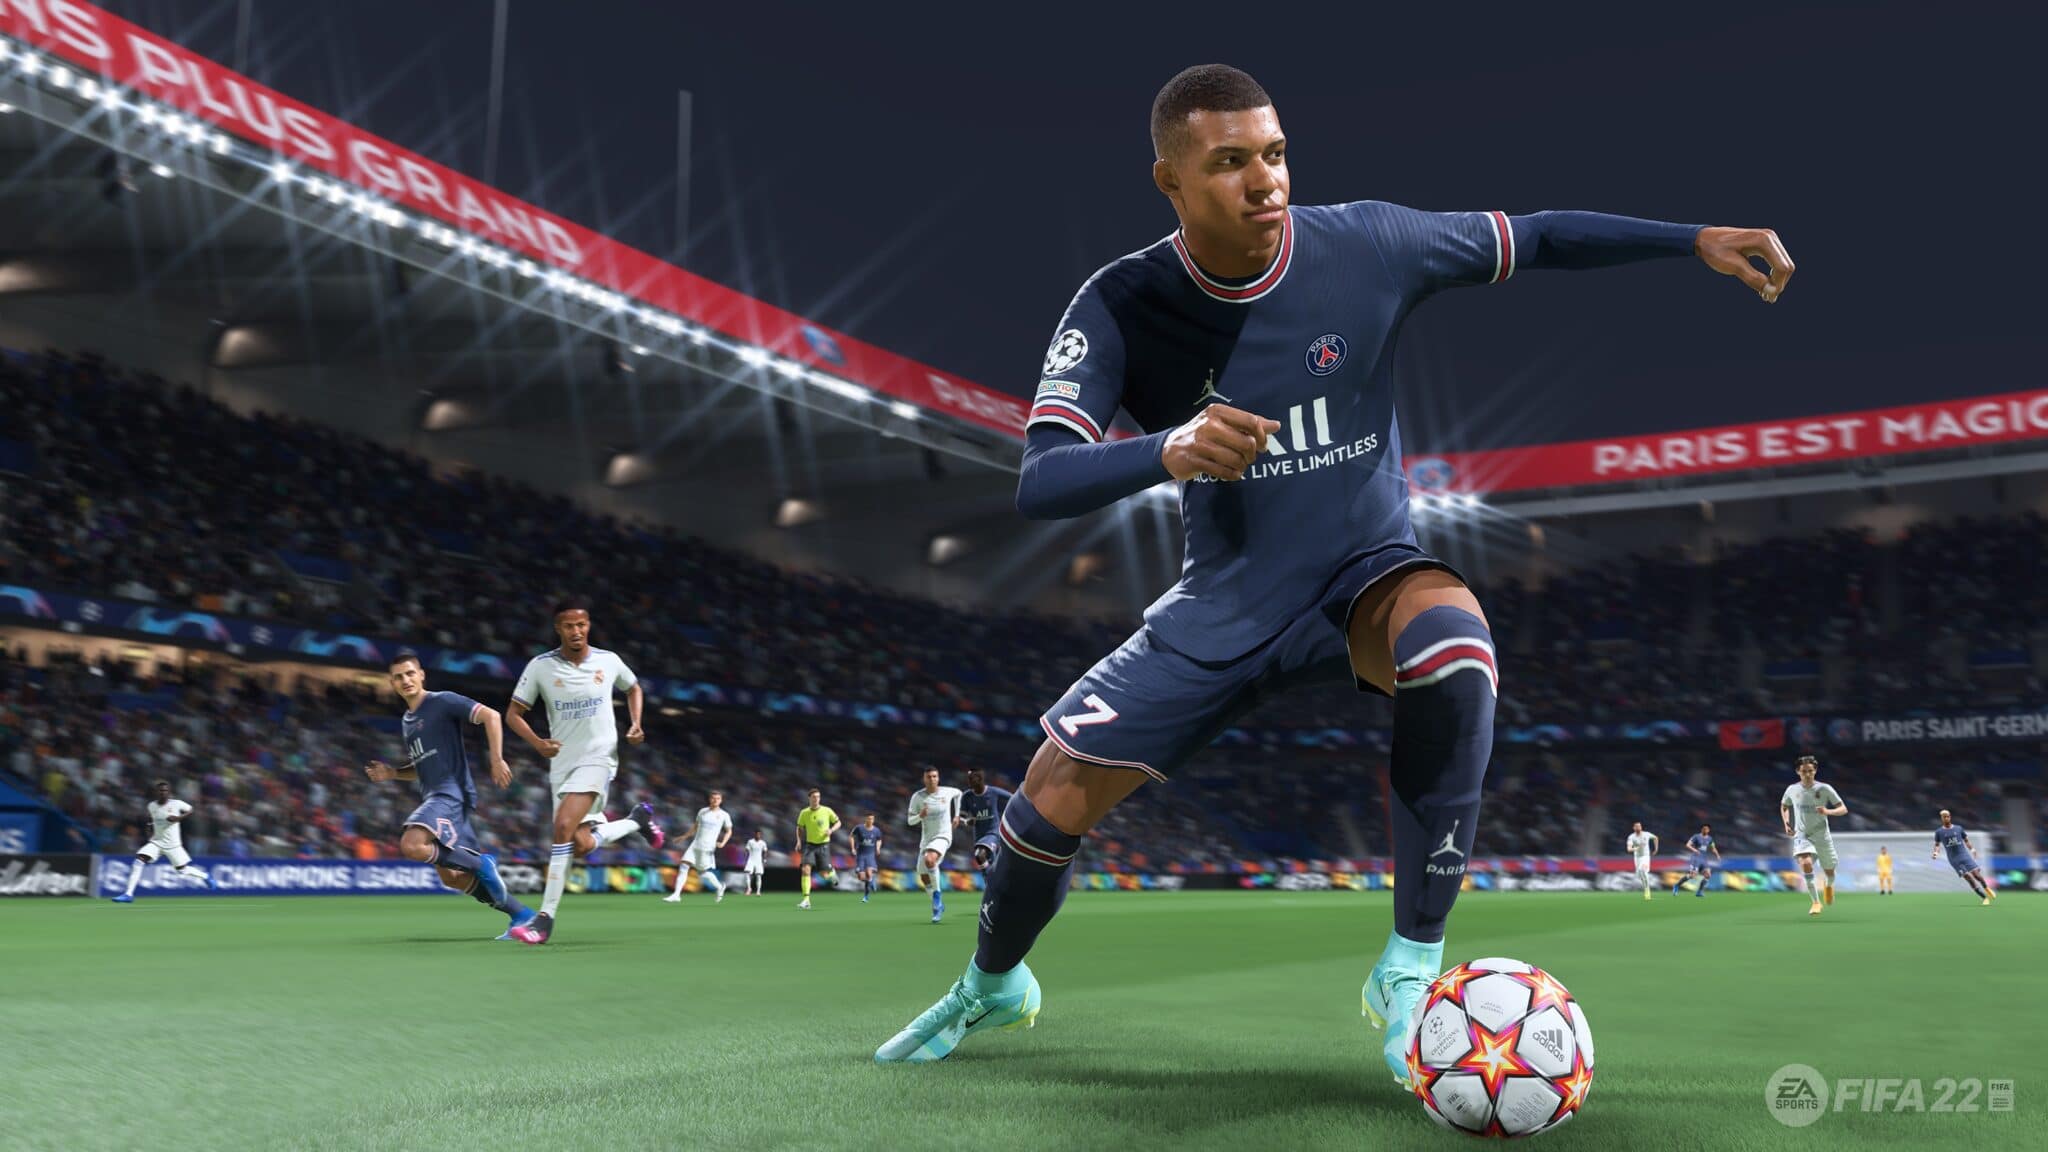 Pre-orderers can use cover star Mbappé for a few games in FUT mode.